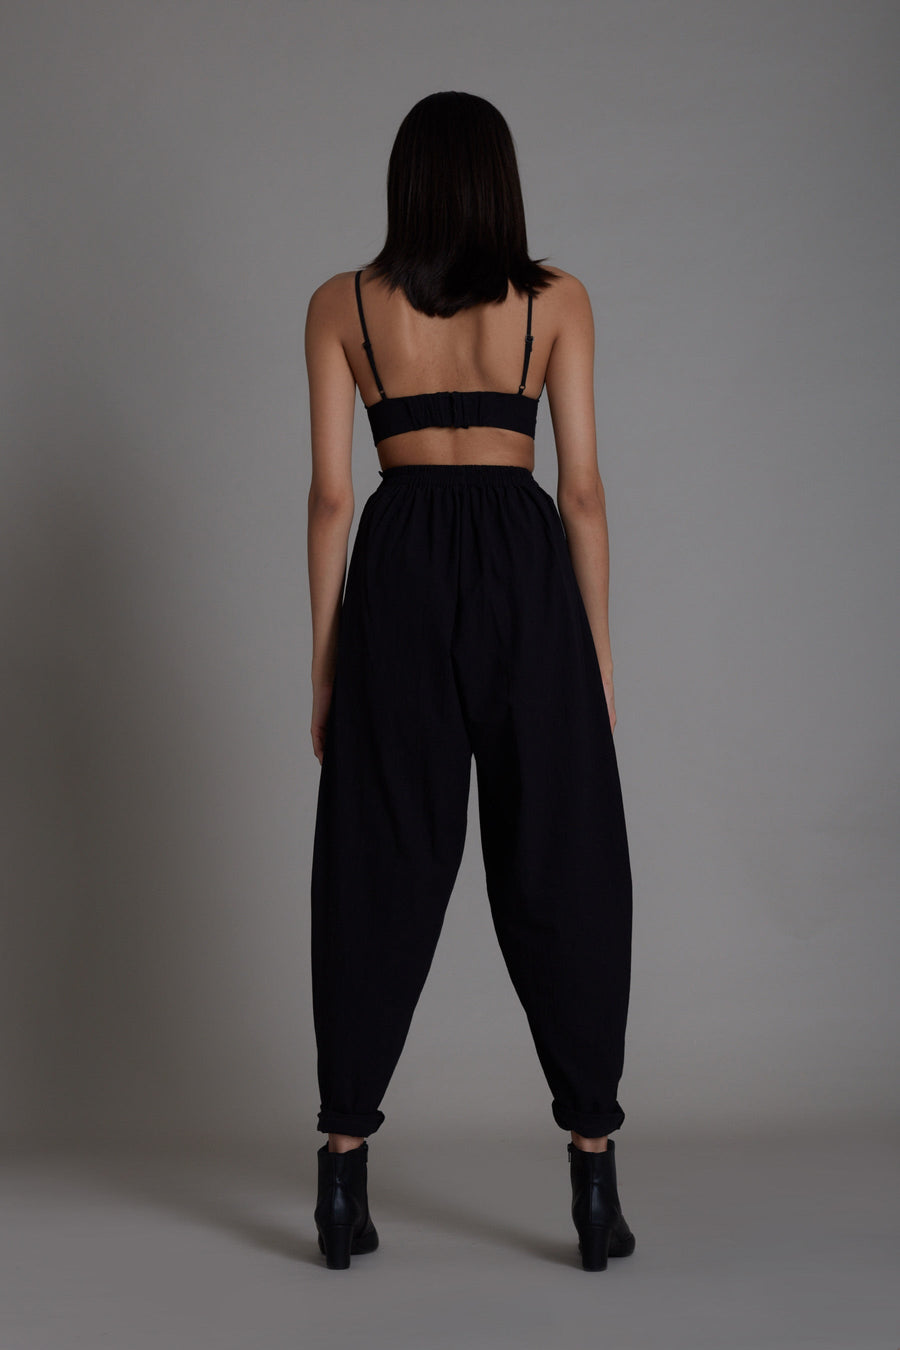 A Model Wearing Black Pure Cotton Black Mile Pants, curated by Only Ethikal